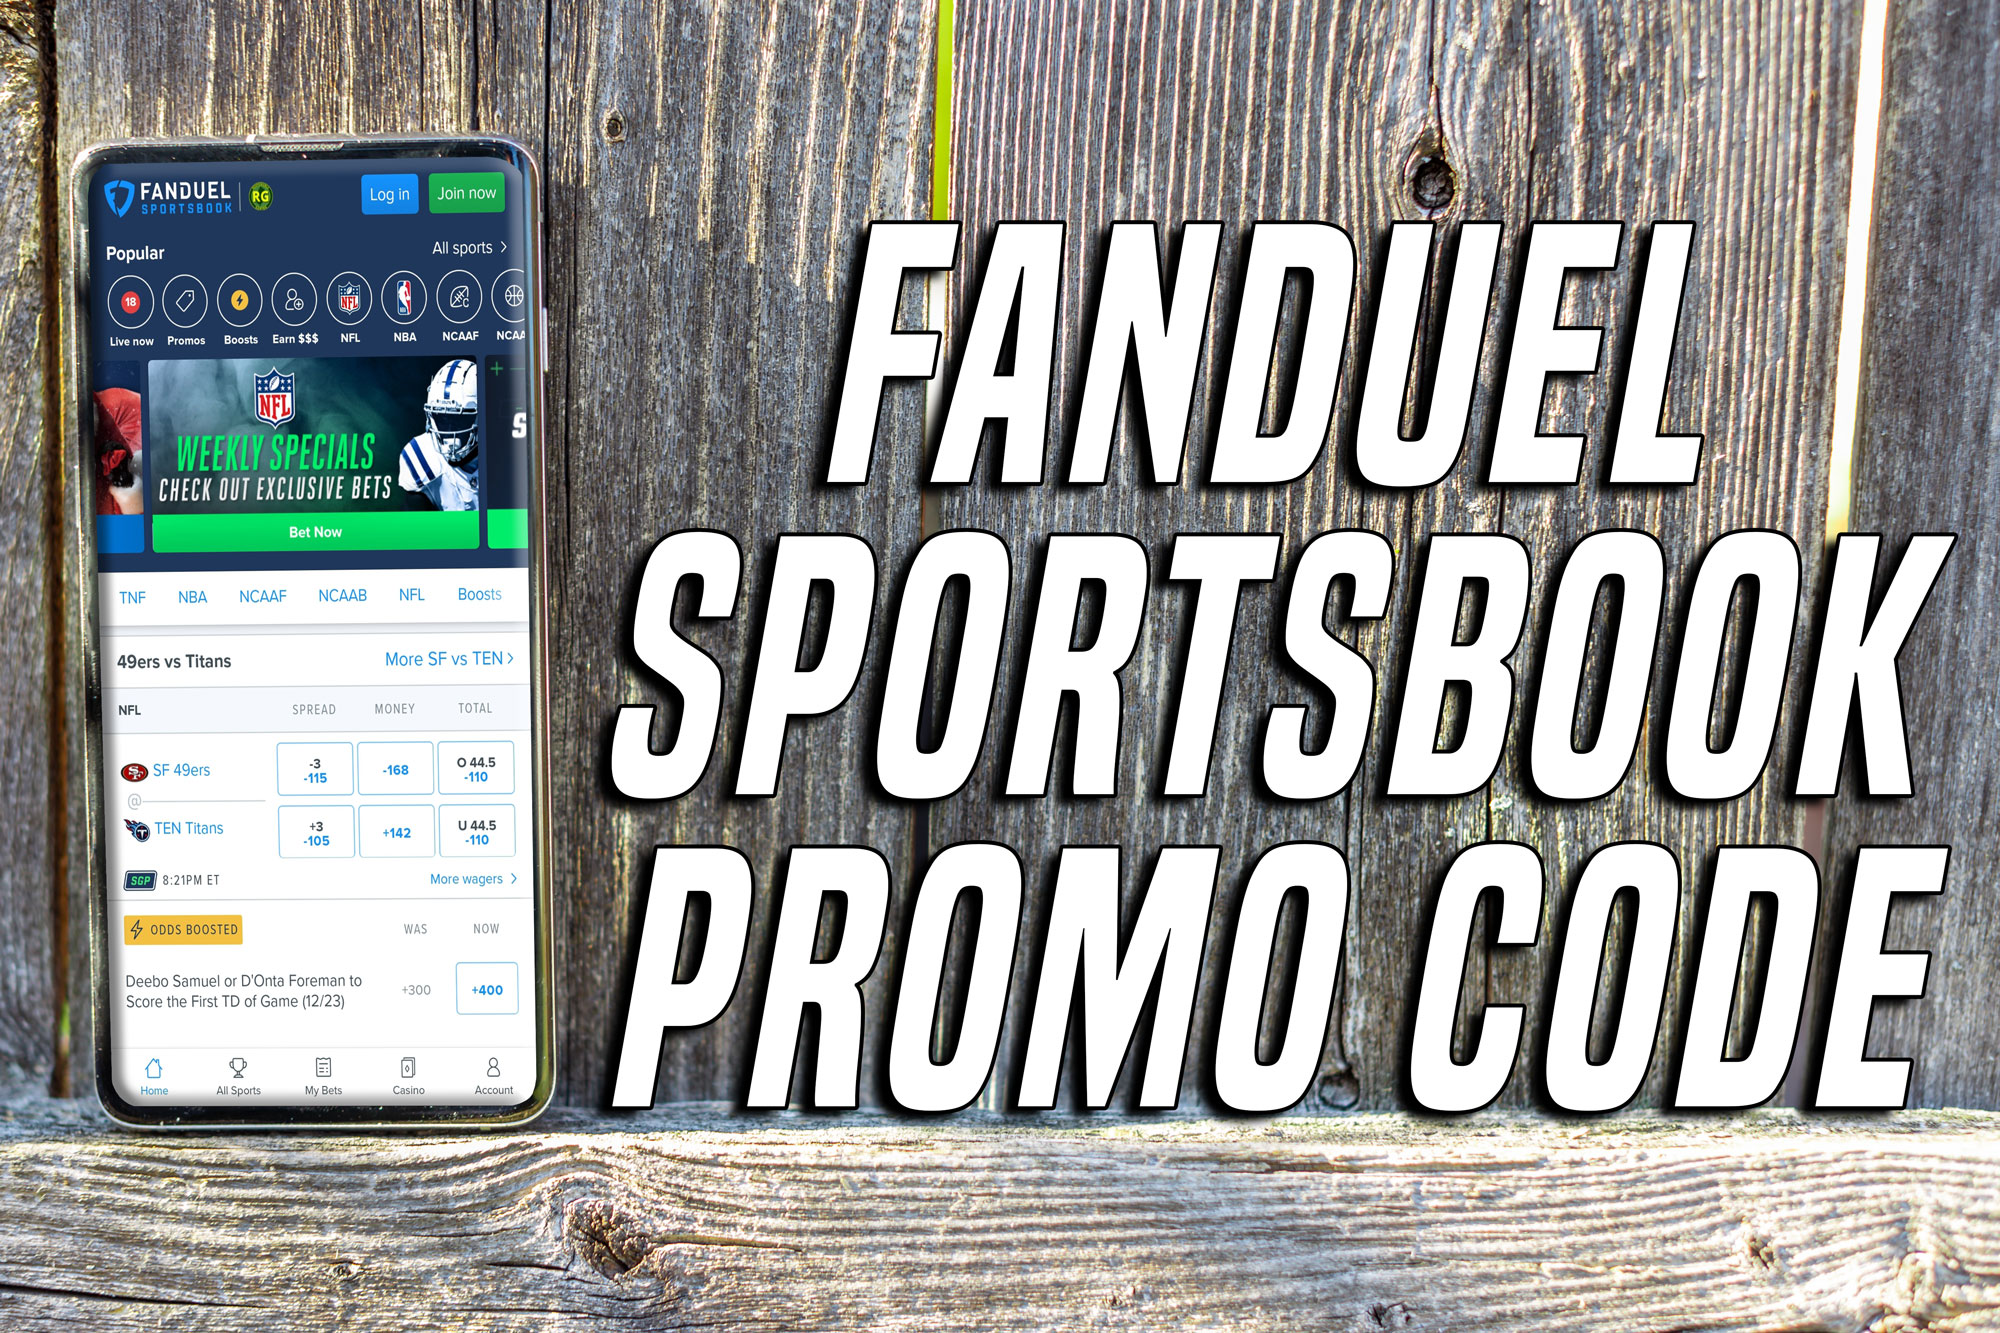 FanDuel promo code offer is the best bet for any NFL Week 7 game 